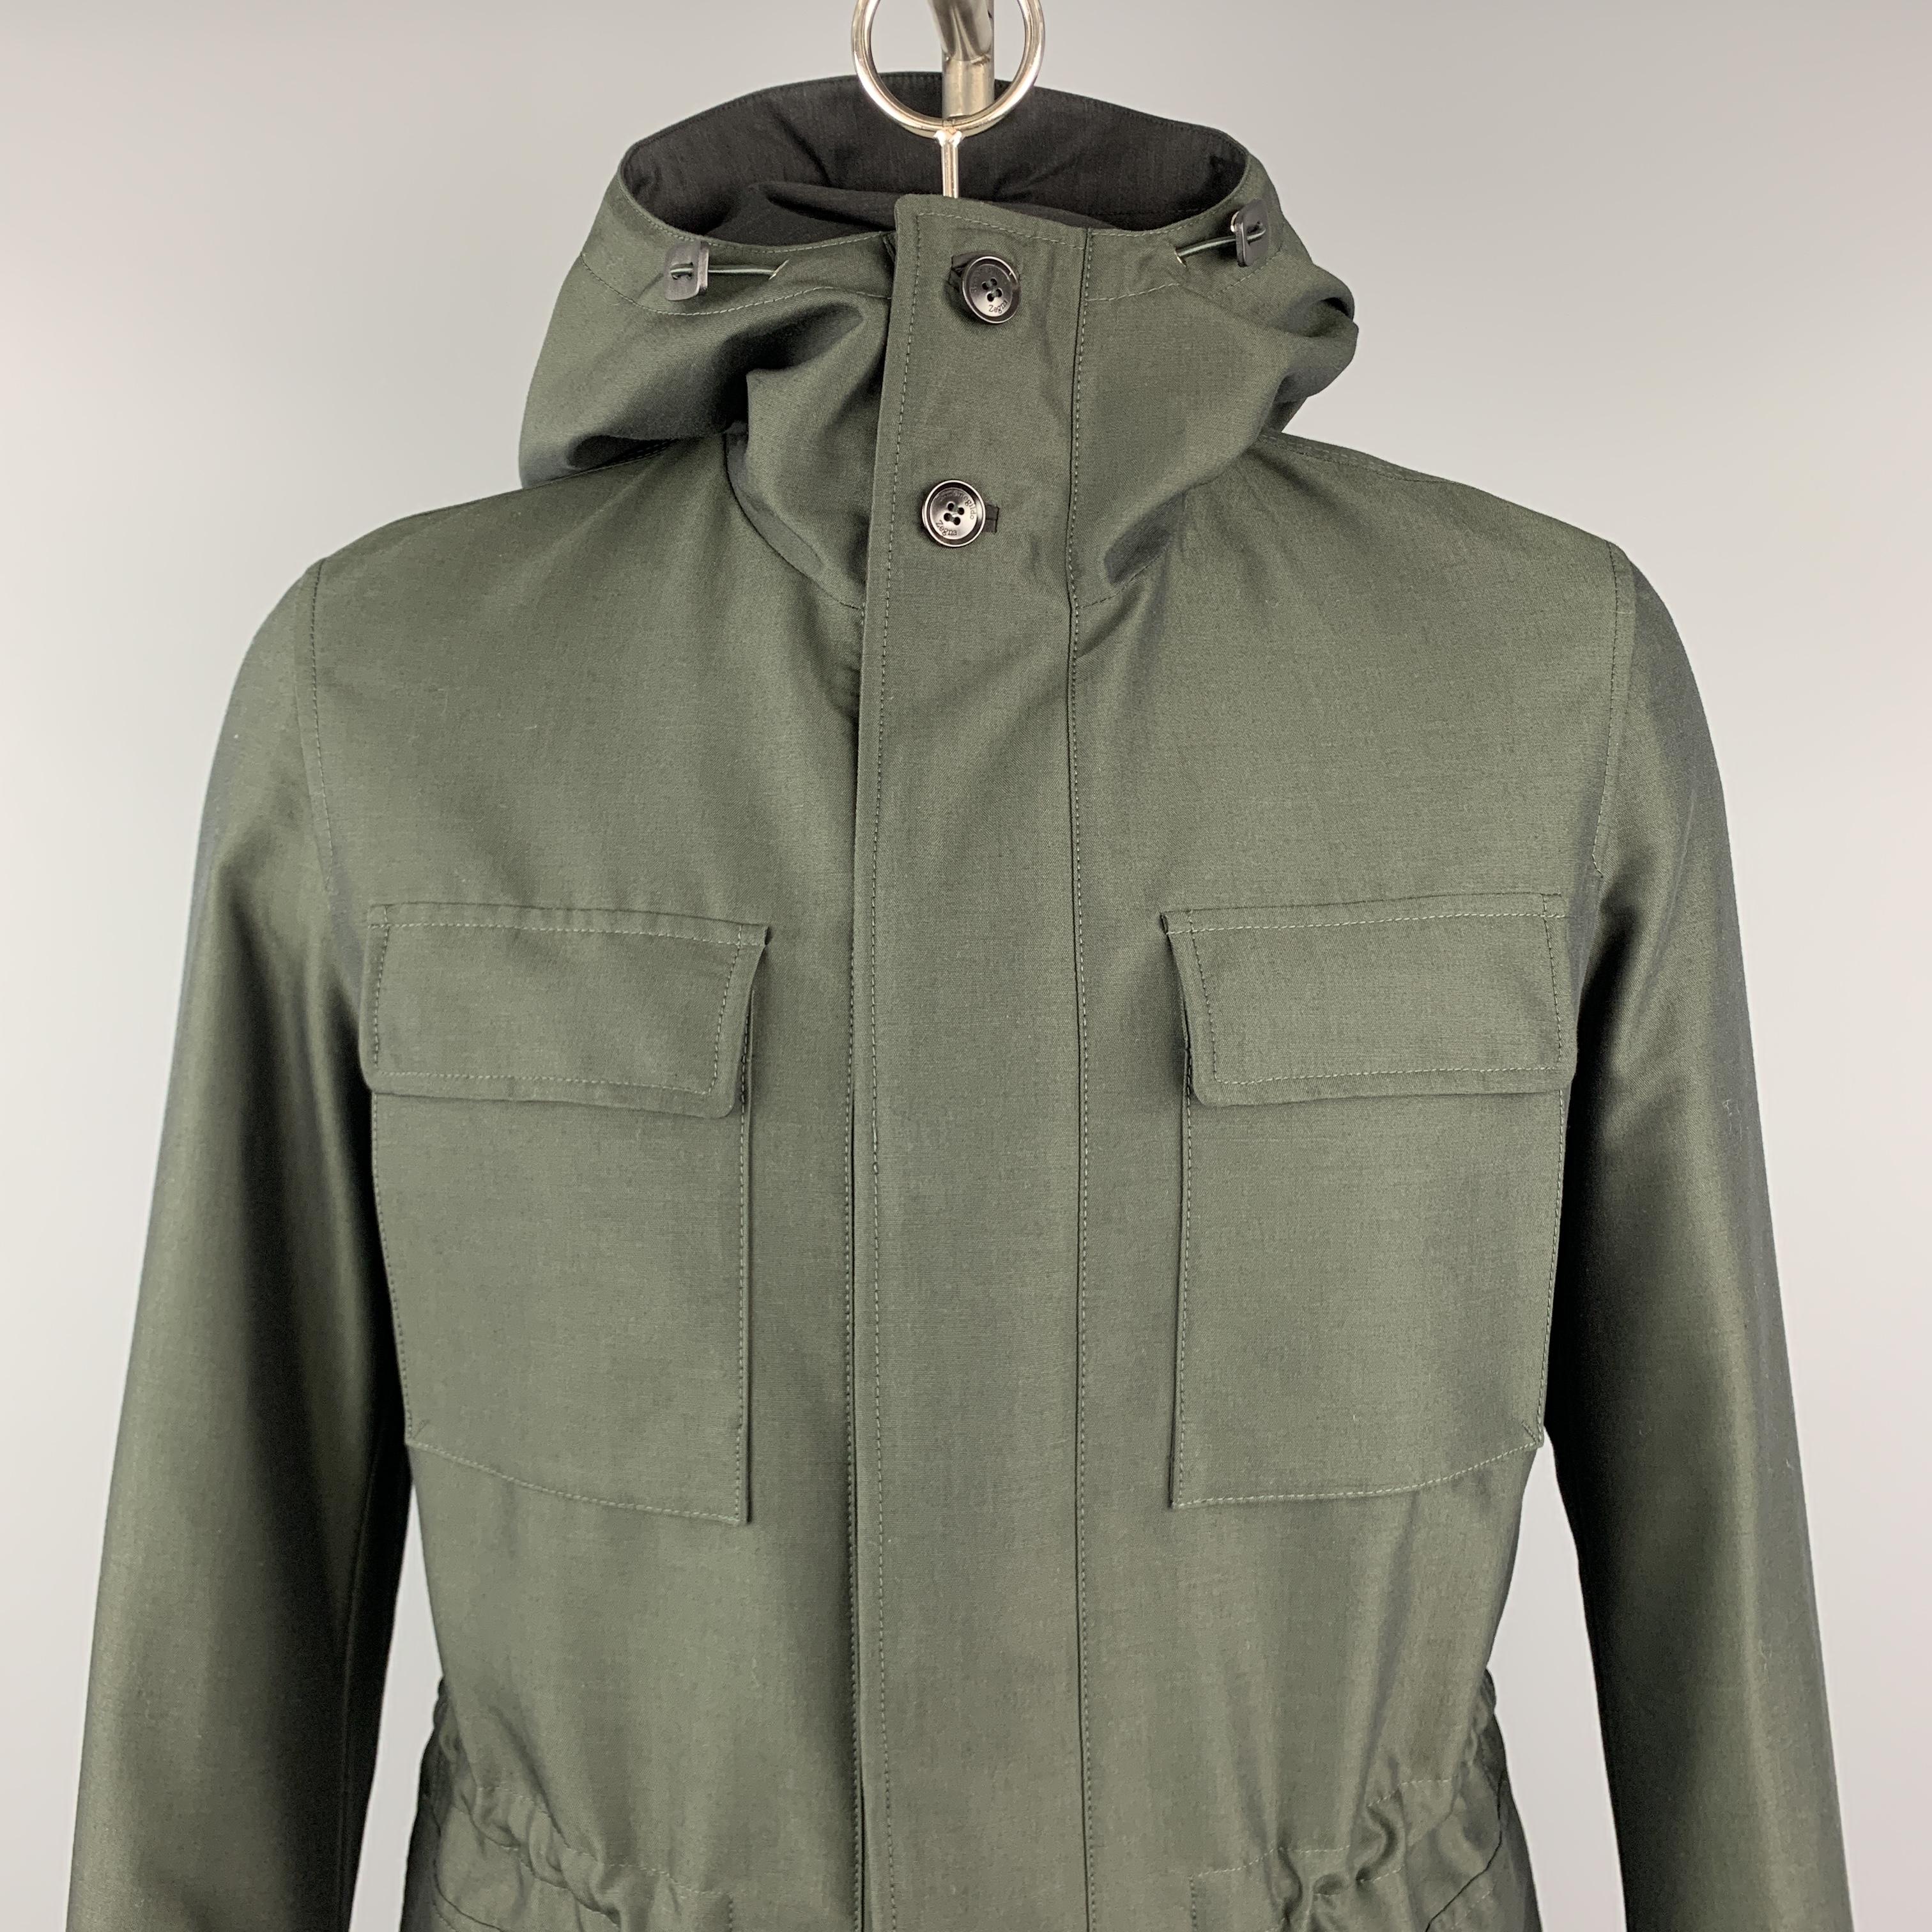 ERMENEGILDO ZEGNA anorak style coat comes in olive green wol cotton blend sharkskin with a high collar hood, zip front with hidden snap placket, drawstring waist, patch flap pockets, and brown suede trim. Made in Italy.

New with Tags.
Marked: IT